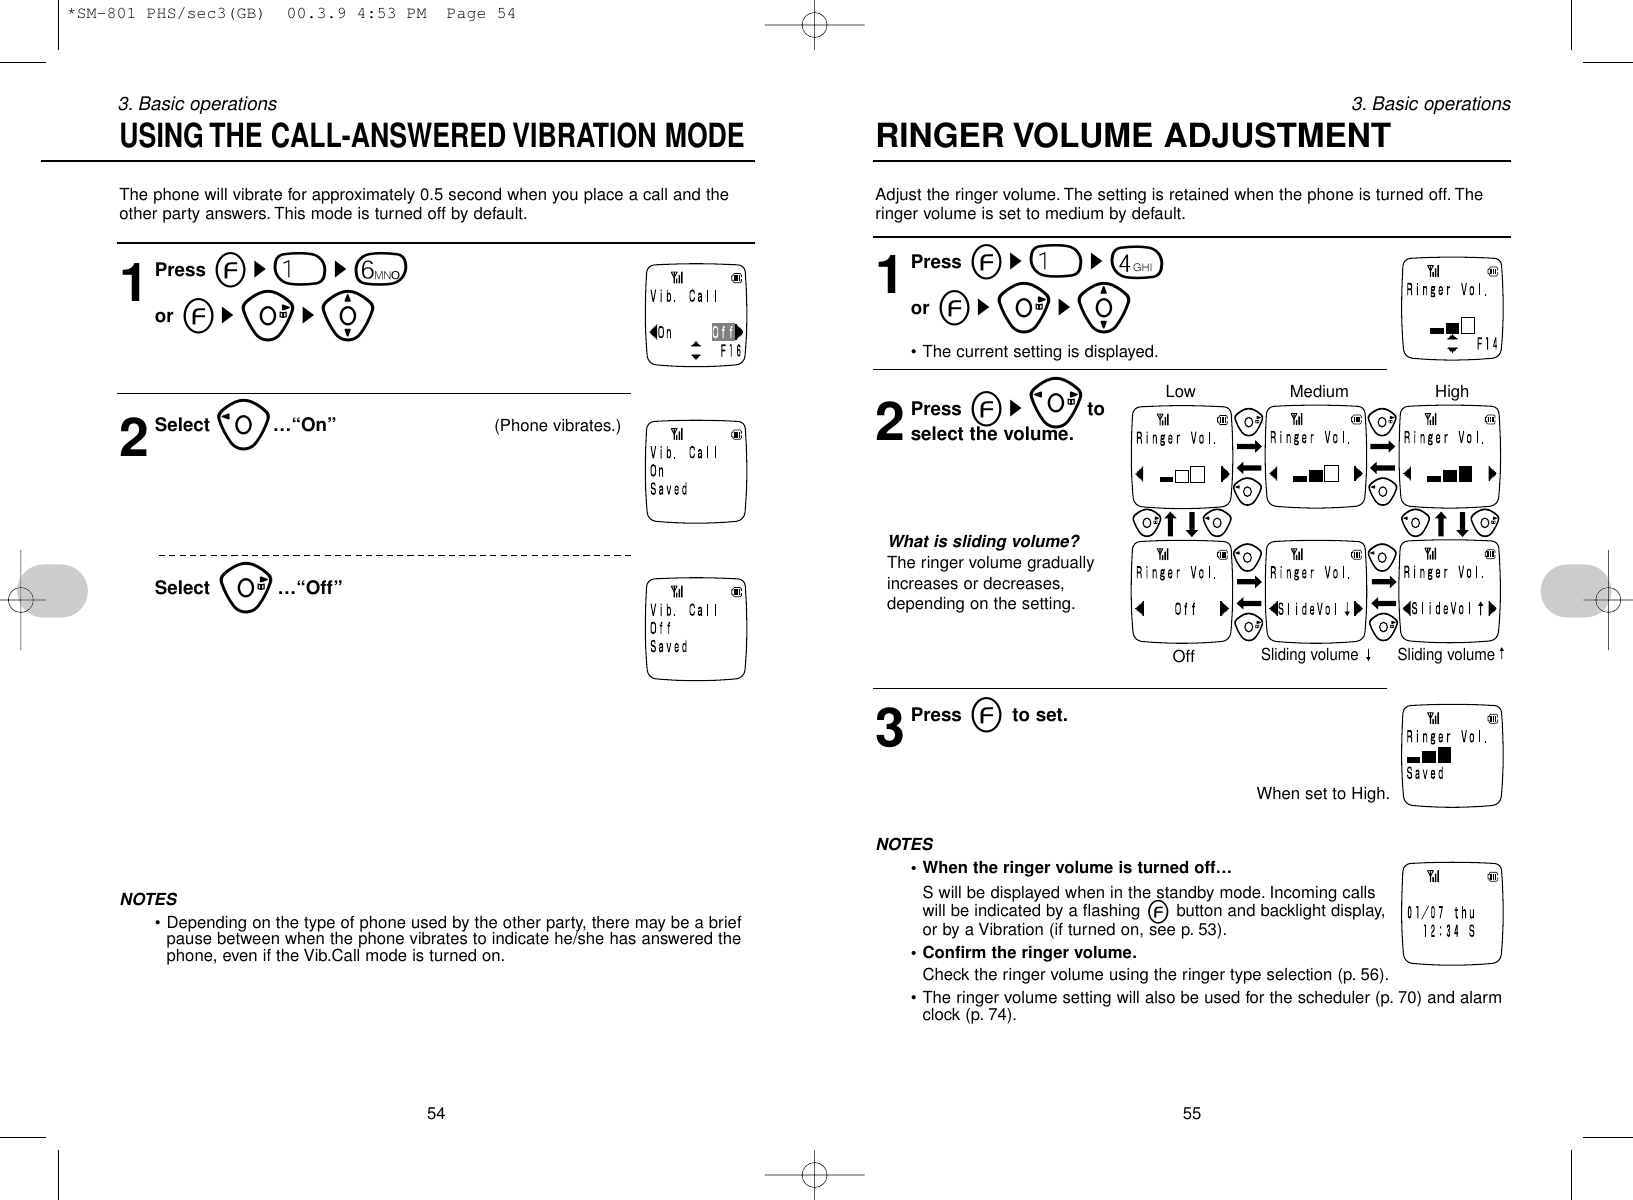 Adjust the ringer volume. The setting is retained when the phone is turned off. Theringer volume is set to medium by default.1Press es1s4or esus[• The current setting is displayed.2Press esptoselect the volume.What is sliding volume?The ringer volume graduallyincreases or decreases,depending on the setting.3Press eto set.When set to High.NOTES• When the ringer volume is turned off…S will be displayed when in the standby mode. Incoming callswill be indicated by a flashing ebutton and backlight display,or by a Vibration (if turned on, see p. 53).• Confirm the ringer volume.Check the ringer volume using the ringer type selection (p. 56).• The ringer volume setting will also be used for the scheduler (p. 70) and alarmclock (p. 74).553. Basic operationsThe phone will vibrate for approximately 0.5 second when you place a call and theother party answers. This mode is turned off by default.1Press es1s6or esus[2Select o…“On” (Phone vibrates.)Select u…“Off”NOTES• Depending on the type of phone used by the other party, there may be a briefpause between when the phone vibrates to indicate he/she has answered thephone, even if the Vib.Call mode is turned on.543. Basic operationsUSING THE CALL-ANSWERED VIBRATION MODERINGER VOLUME ADJUSTMENTLowOffSliding volume Sliding volumeMedium High*SM-801 PHS/sec3(GB)  00.3.9 4:53 PM  Page 54